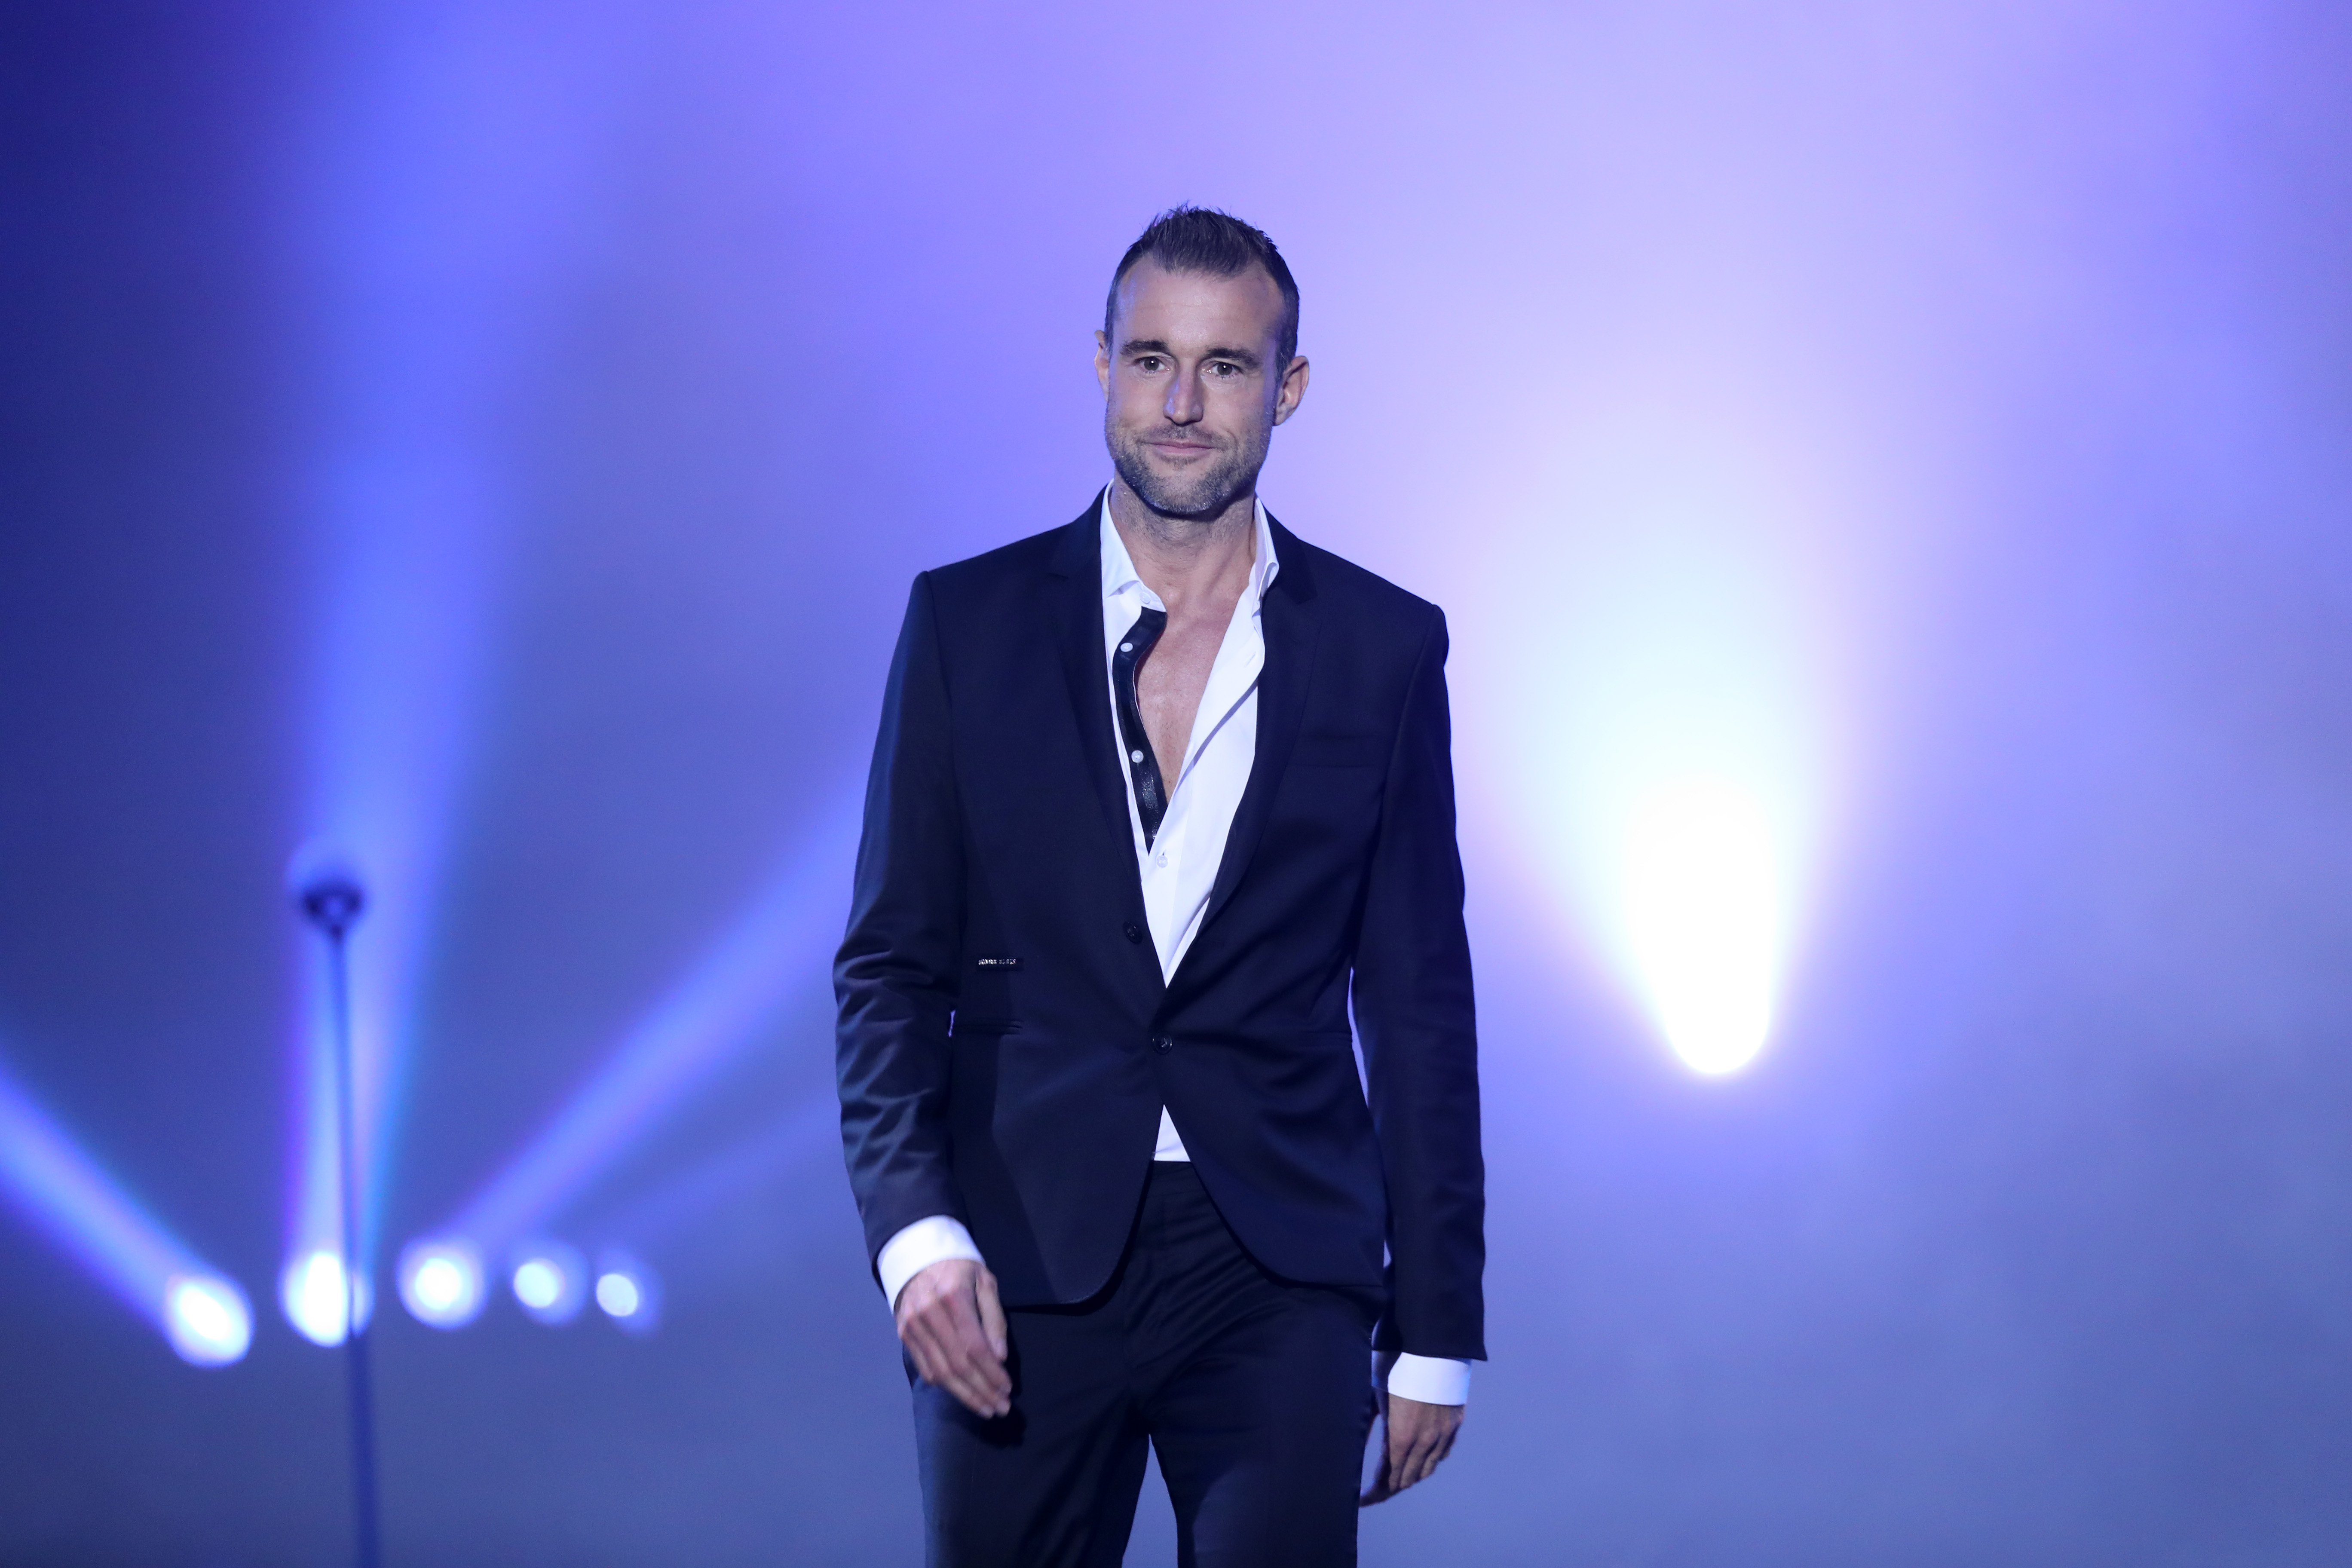 Philipp Plein to Appear on "America's Next Top Model" - Daily Front Row